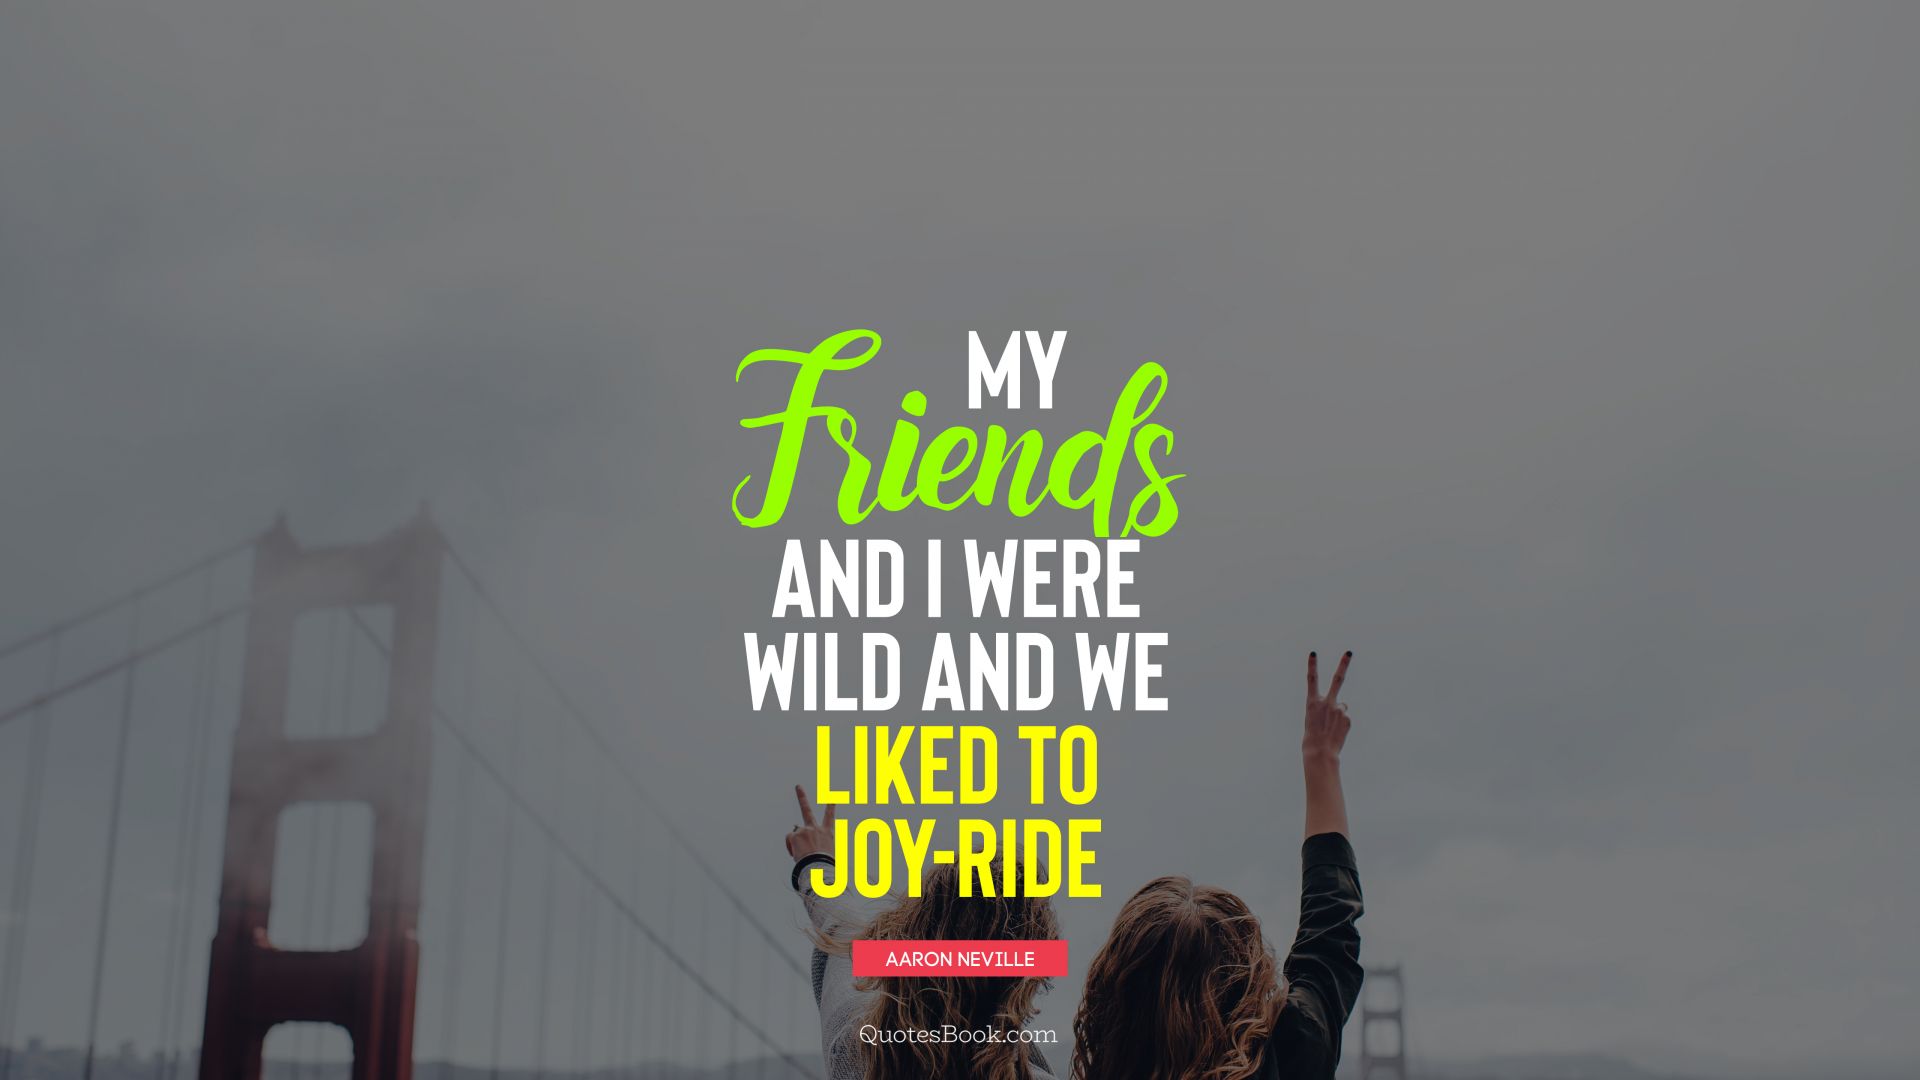 My friends and I were wild and we liked to joy-ride. - Quote by Aaron Neville